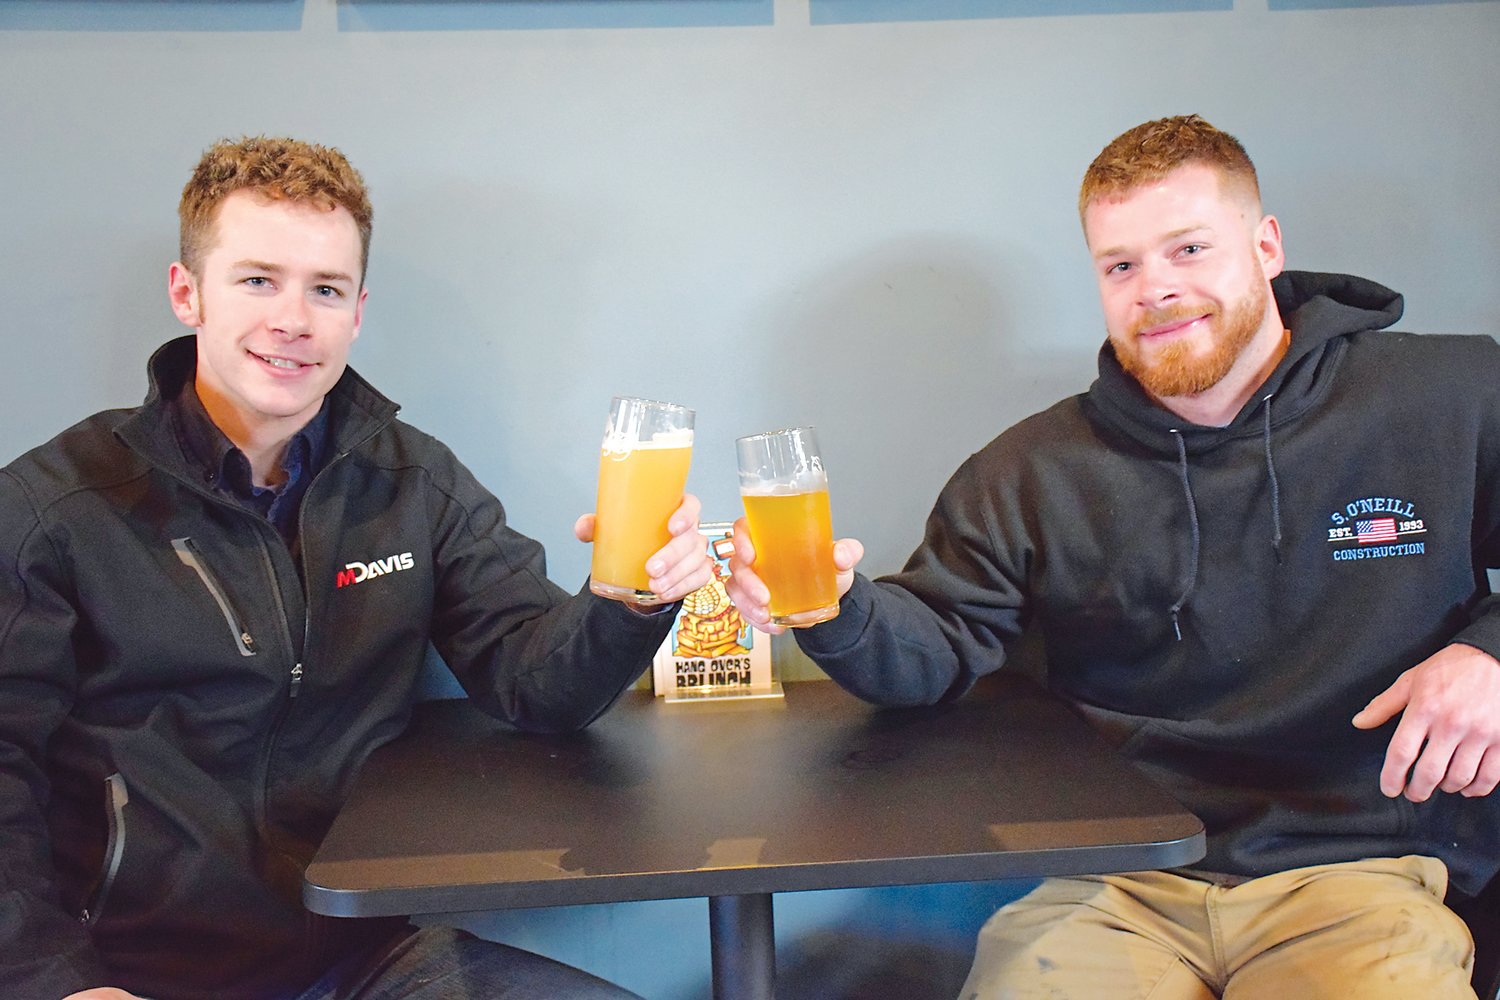 Brothers Lan and Spencer Schultz, of Perkasie, raise a glass in downtown Perkasie on Jan. 28.